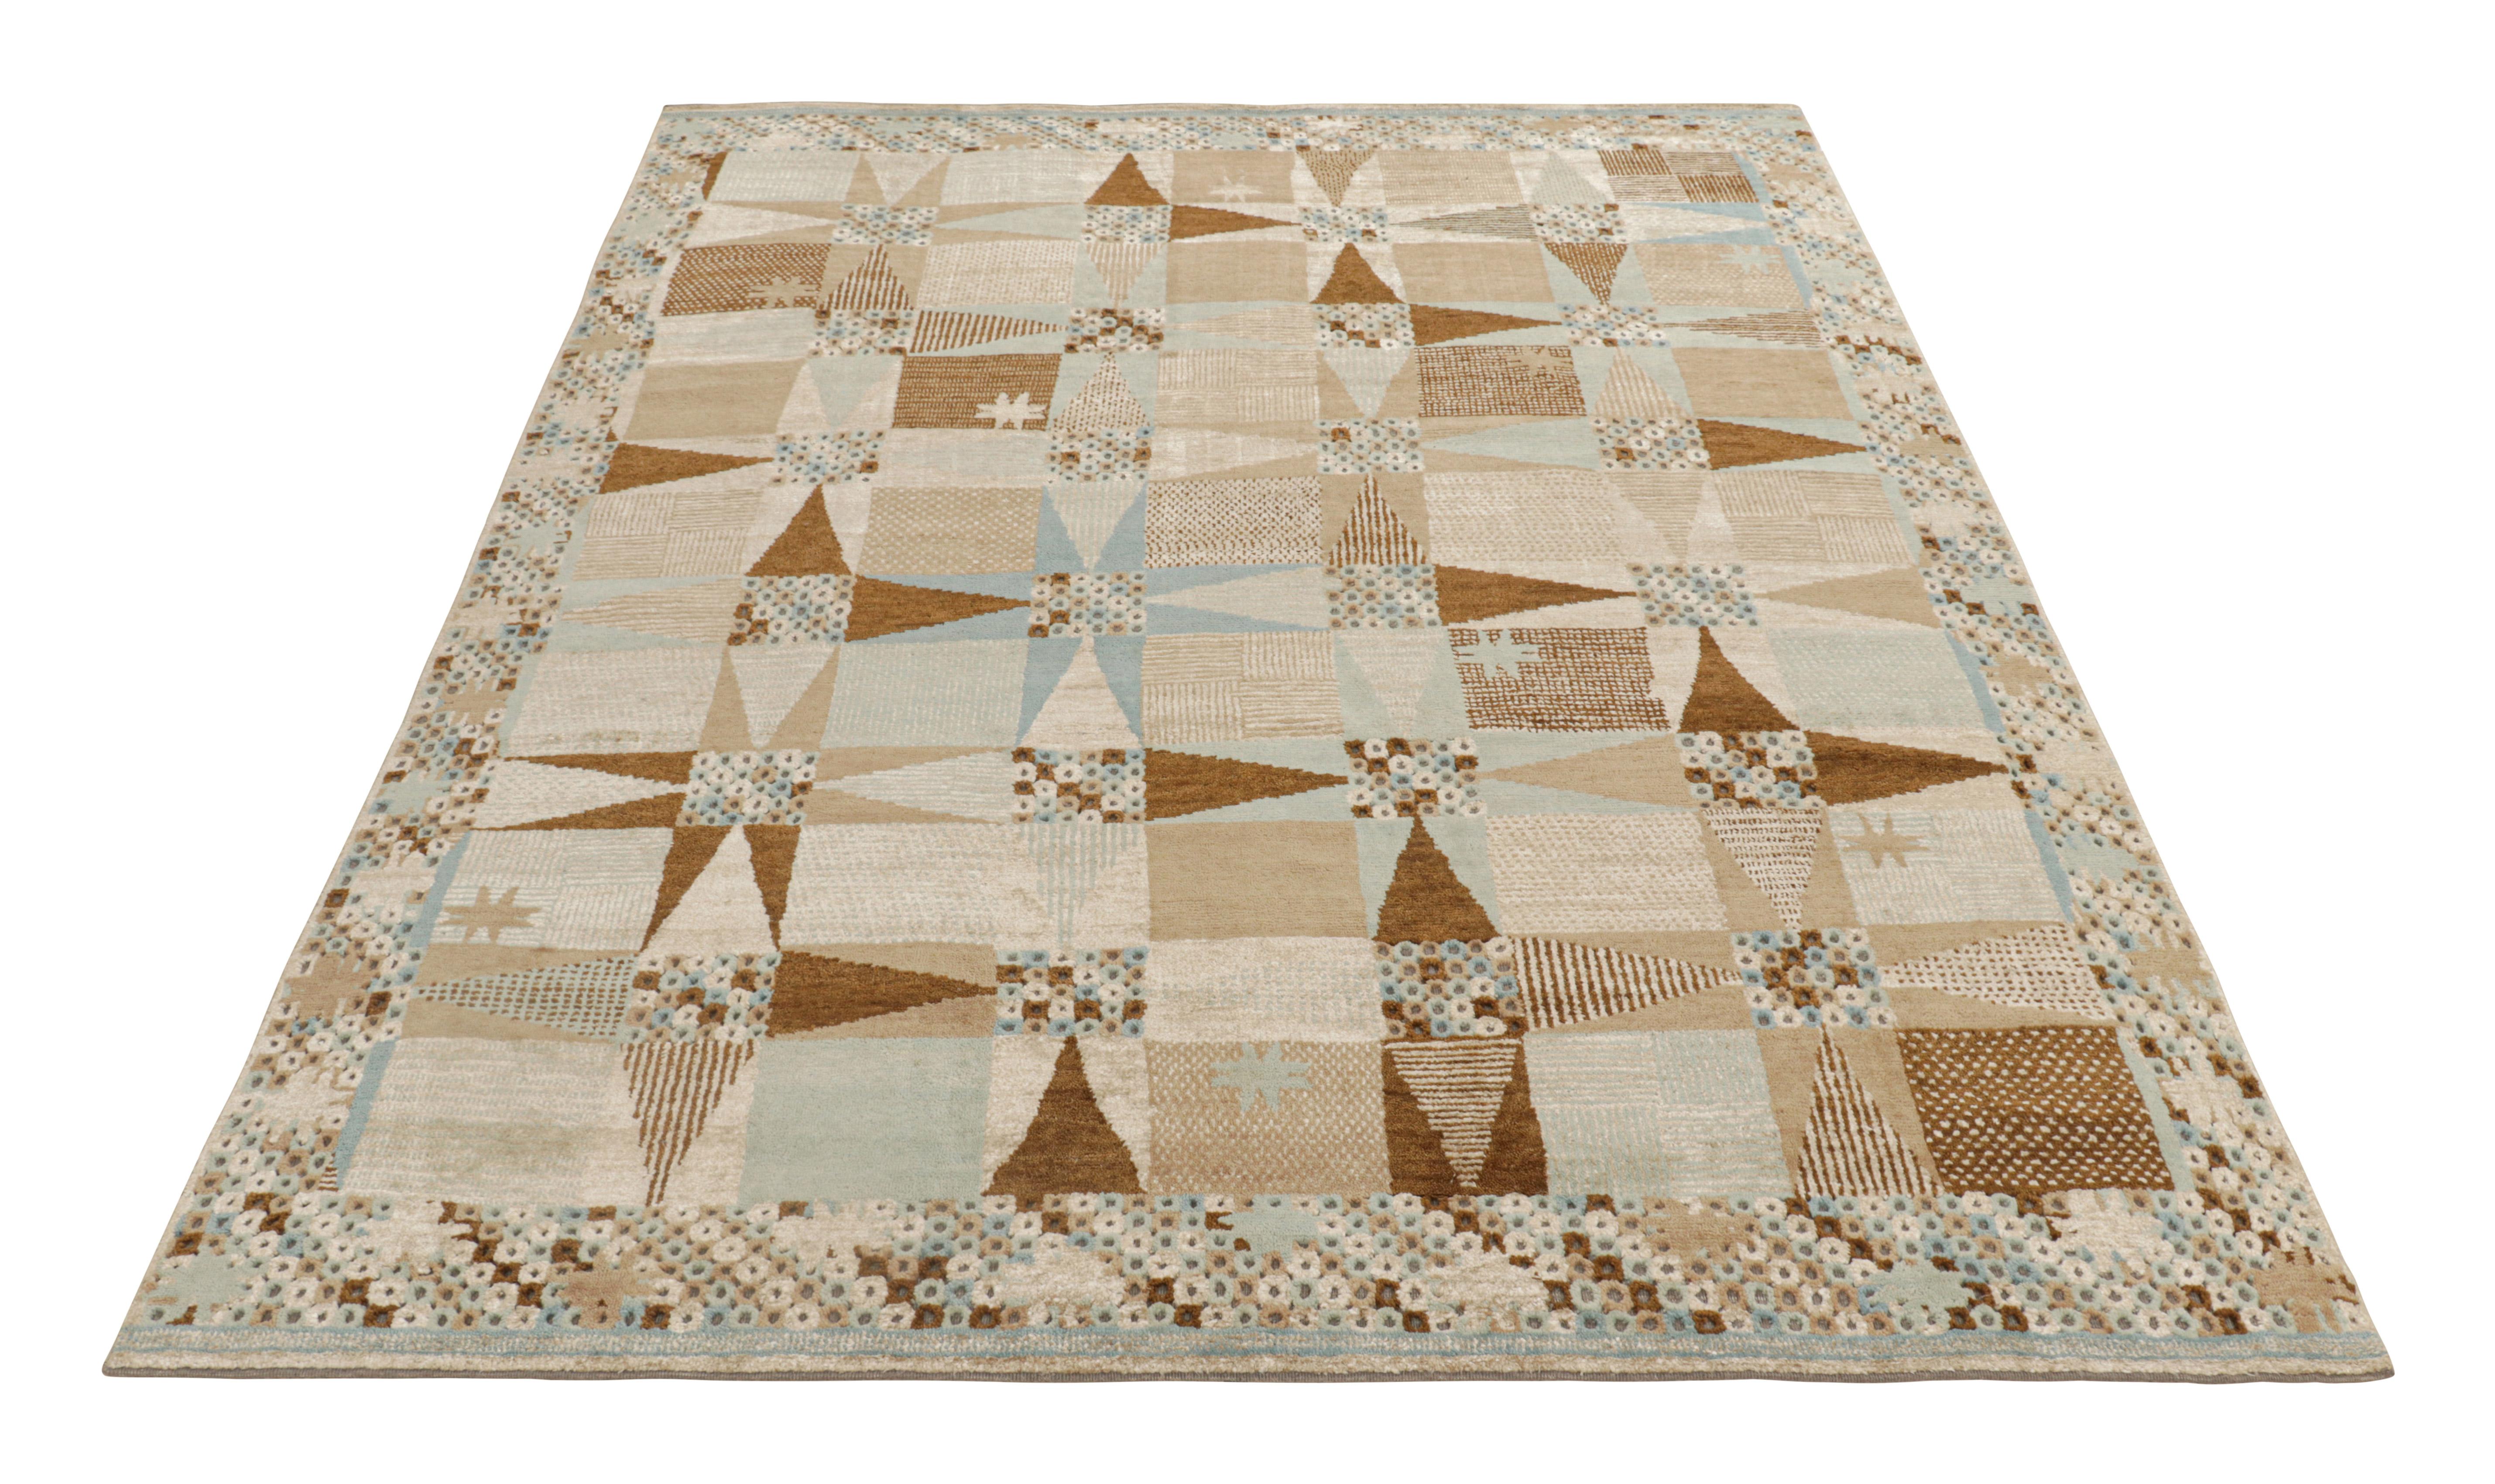 Indian Rug & Kilim’s Scandinavian Style Rug in Beige-Brown and Blue Geometric Patterns For Sale